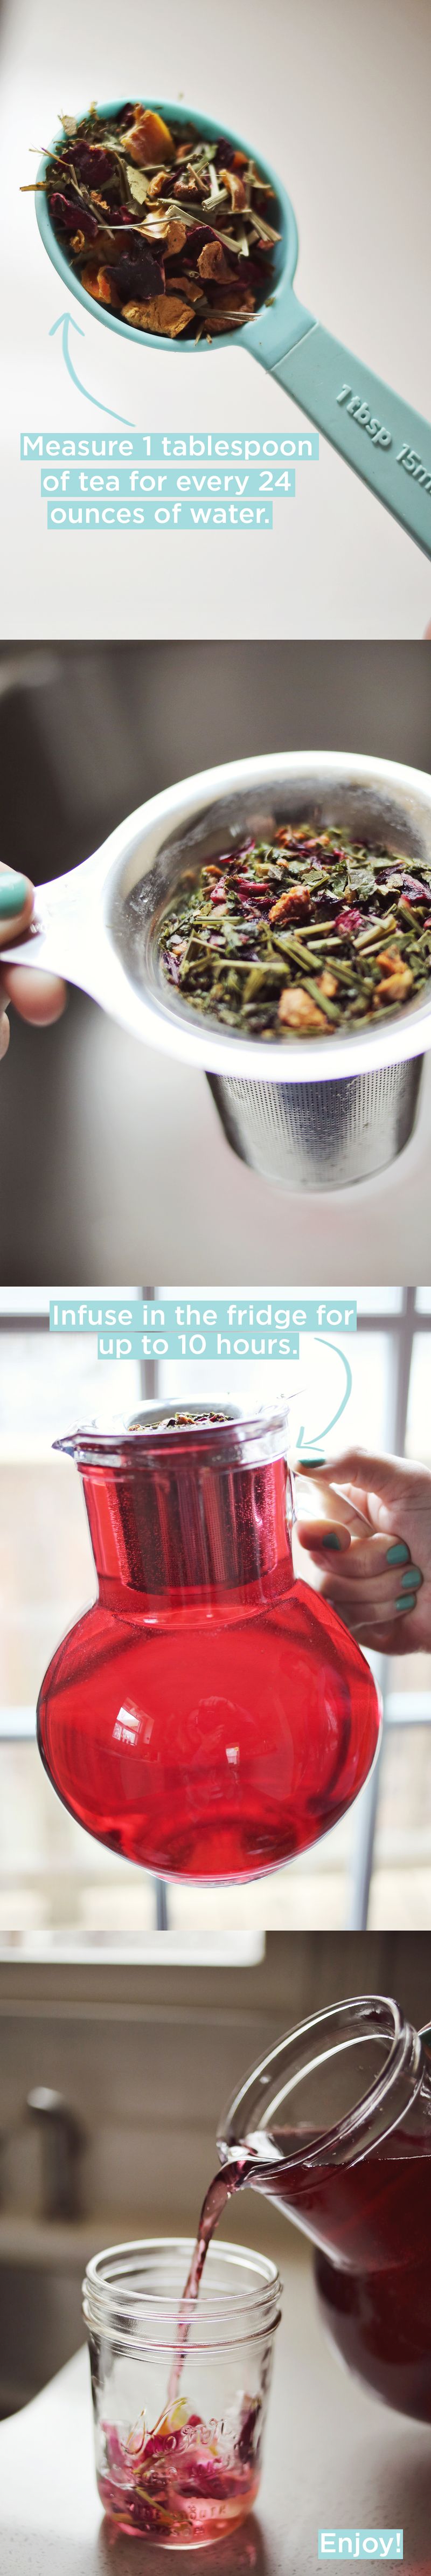 How to cold brew tea 